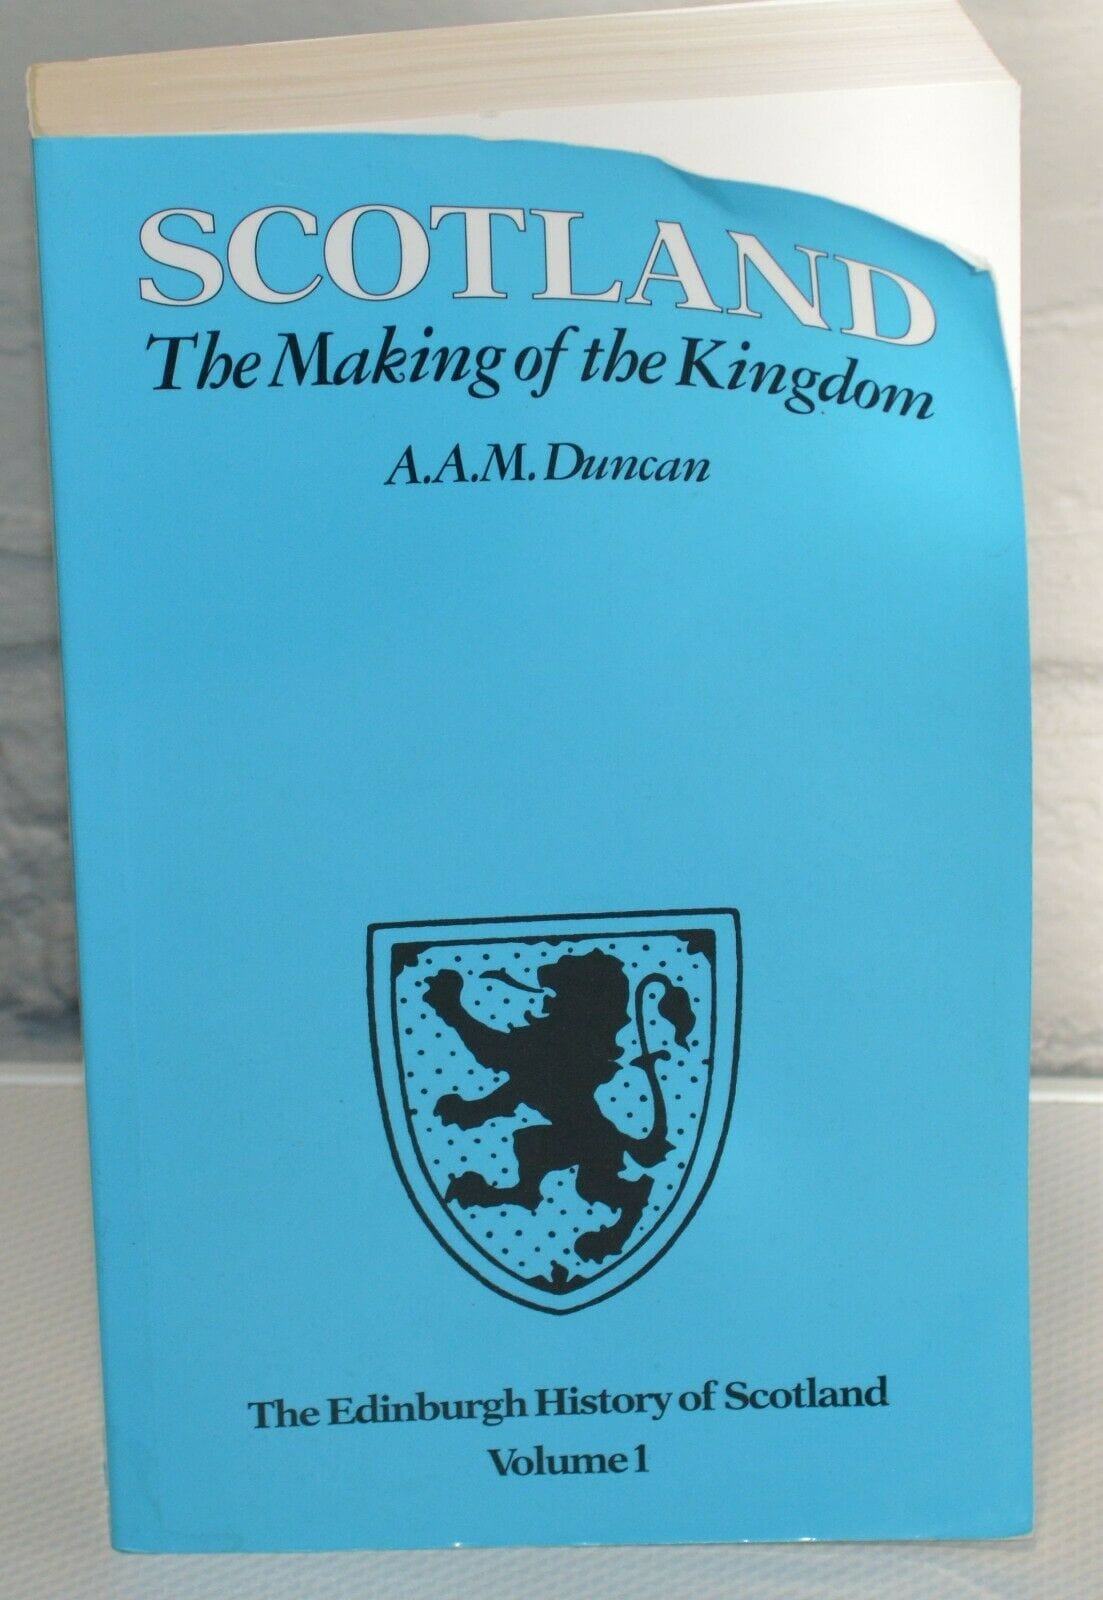 SECONDHAND BOOK SCOTLAND THE MAKING OF THE KINGDOM THE EDINBURGH HISTORY OF SCOTLAND VOL 1(PREVIOUSLY OWNED) GOOD CONDITION - TMD167207